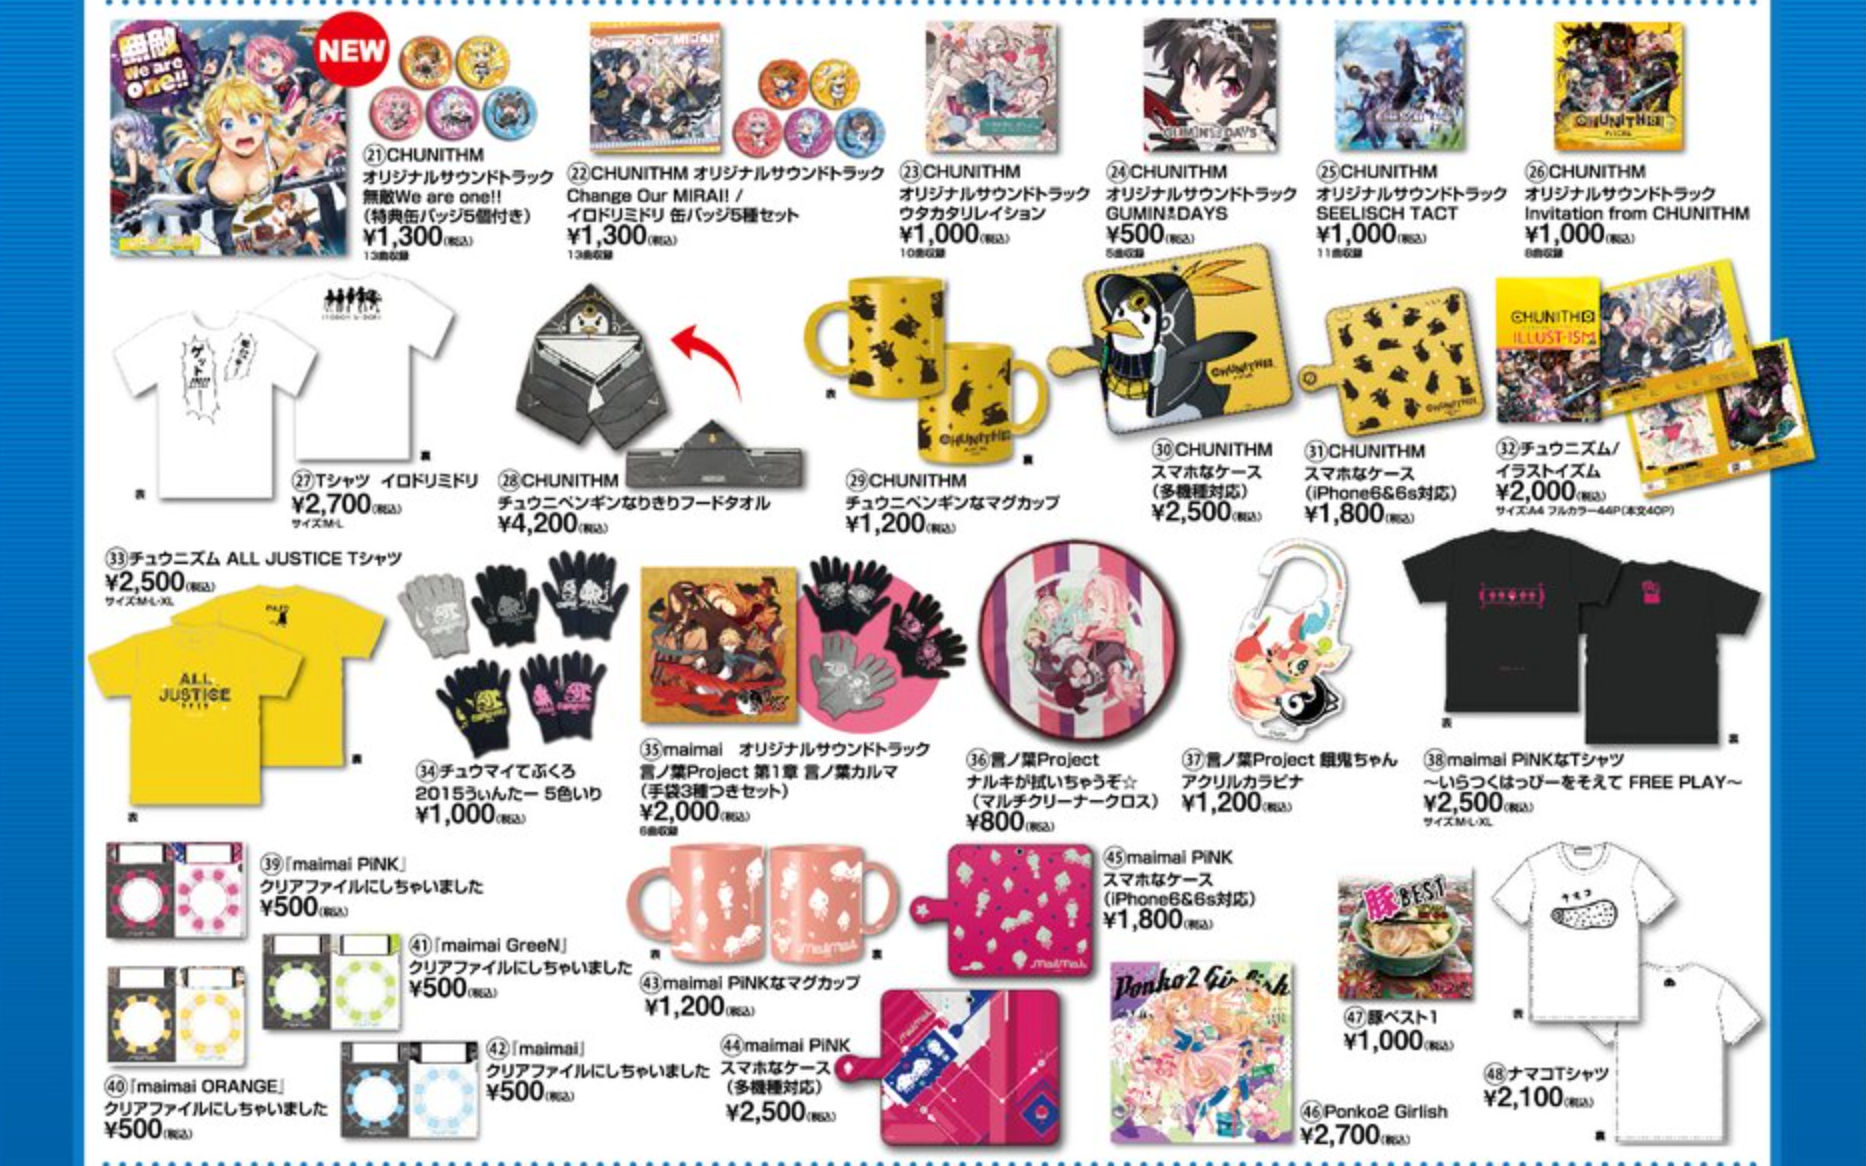 Bemanistyle On Twitter Sega Will Sell Some Interesting Goods At Jaepo This Saturday Including Maimai Chunithm Gloves Phone Cases More Https T Co Hicdp6yxve